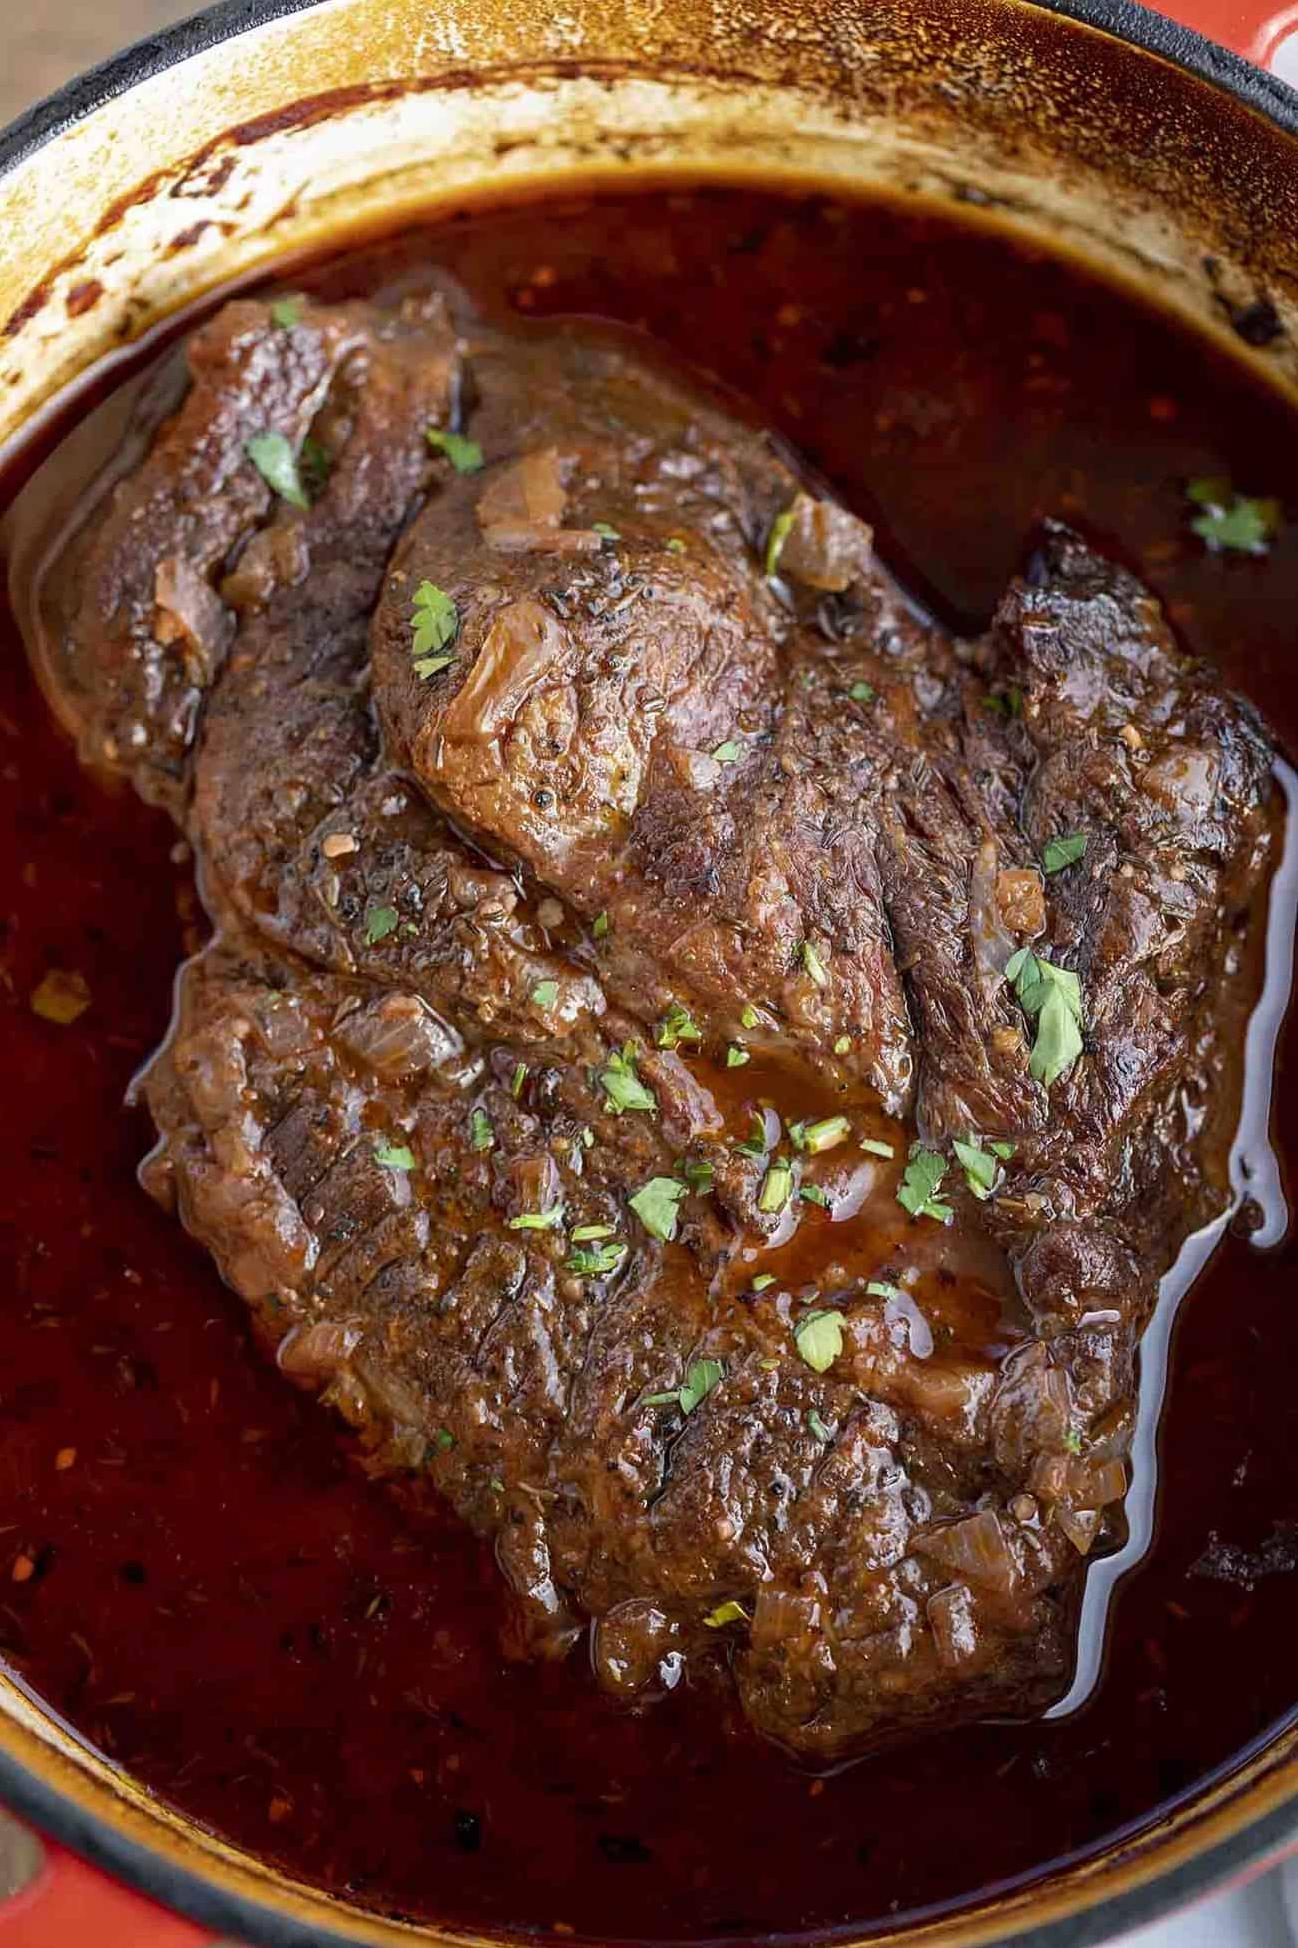  A perfect Sunday dinner: juicy roast beef glazed with Cabernet.